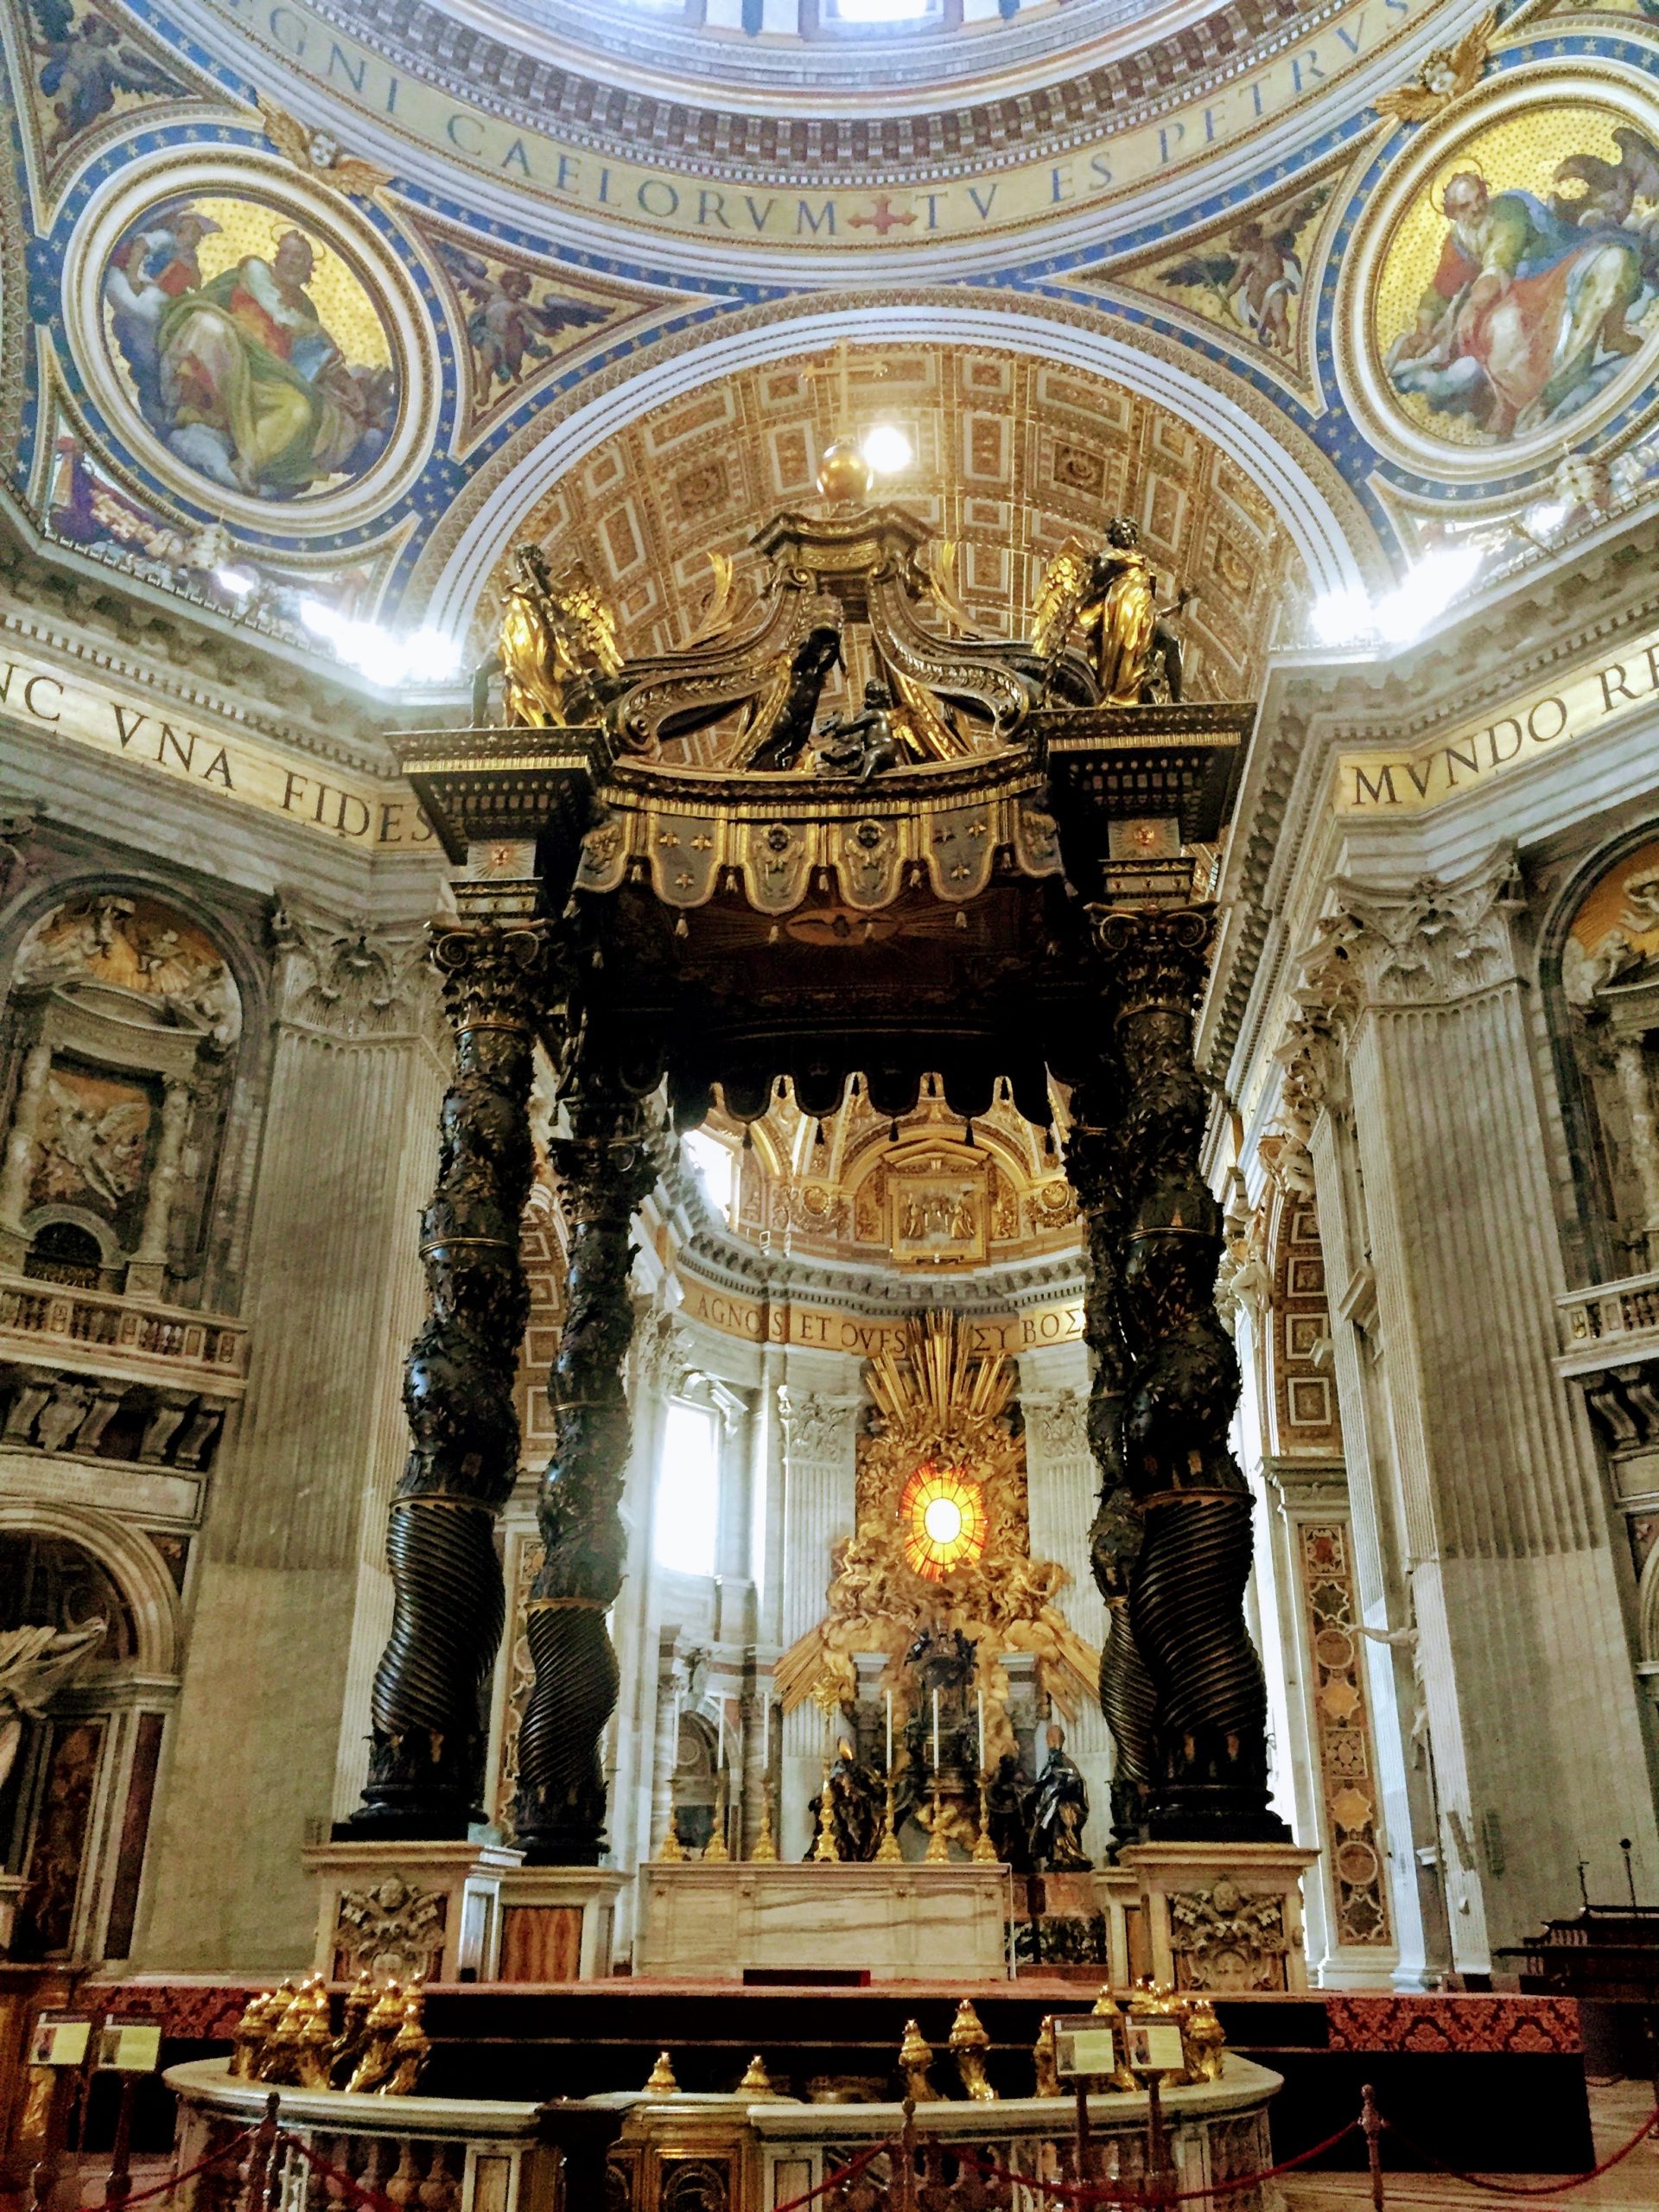 Top 10 Best Churches To Visit In Rome For Amazing Art - The FRUGAL TOURIST